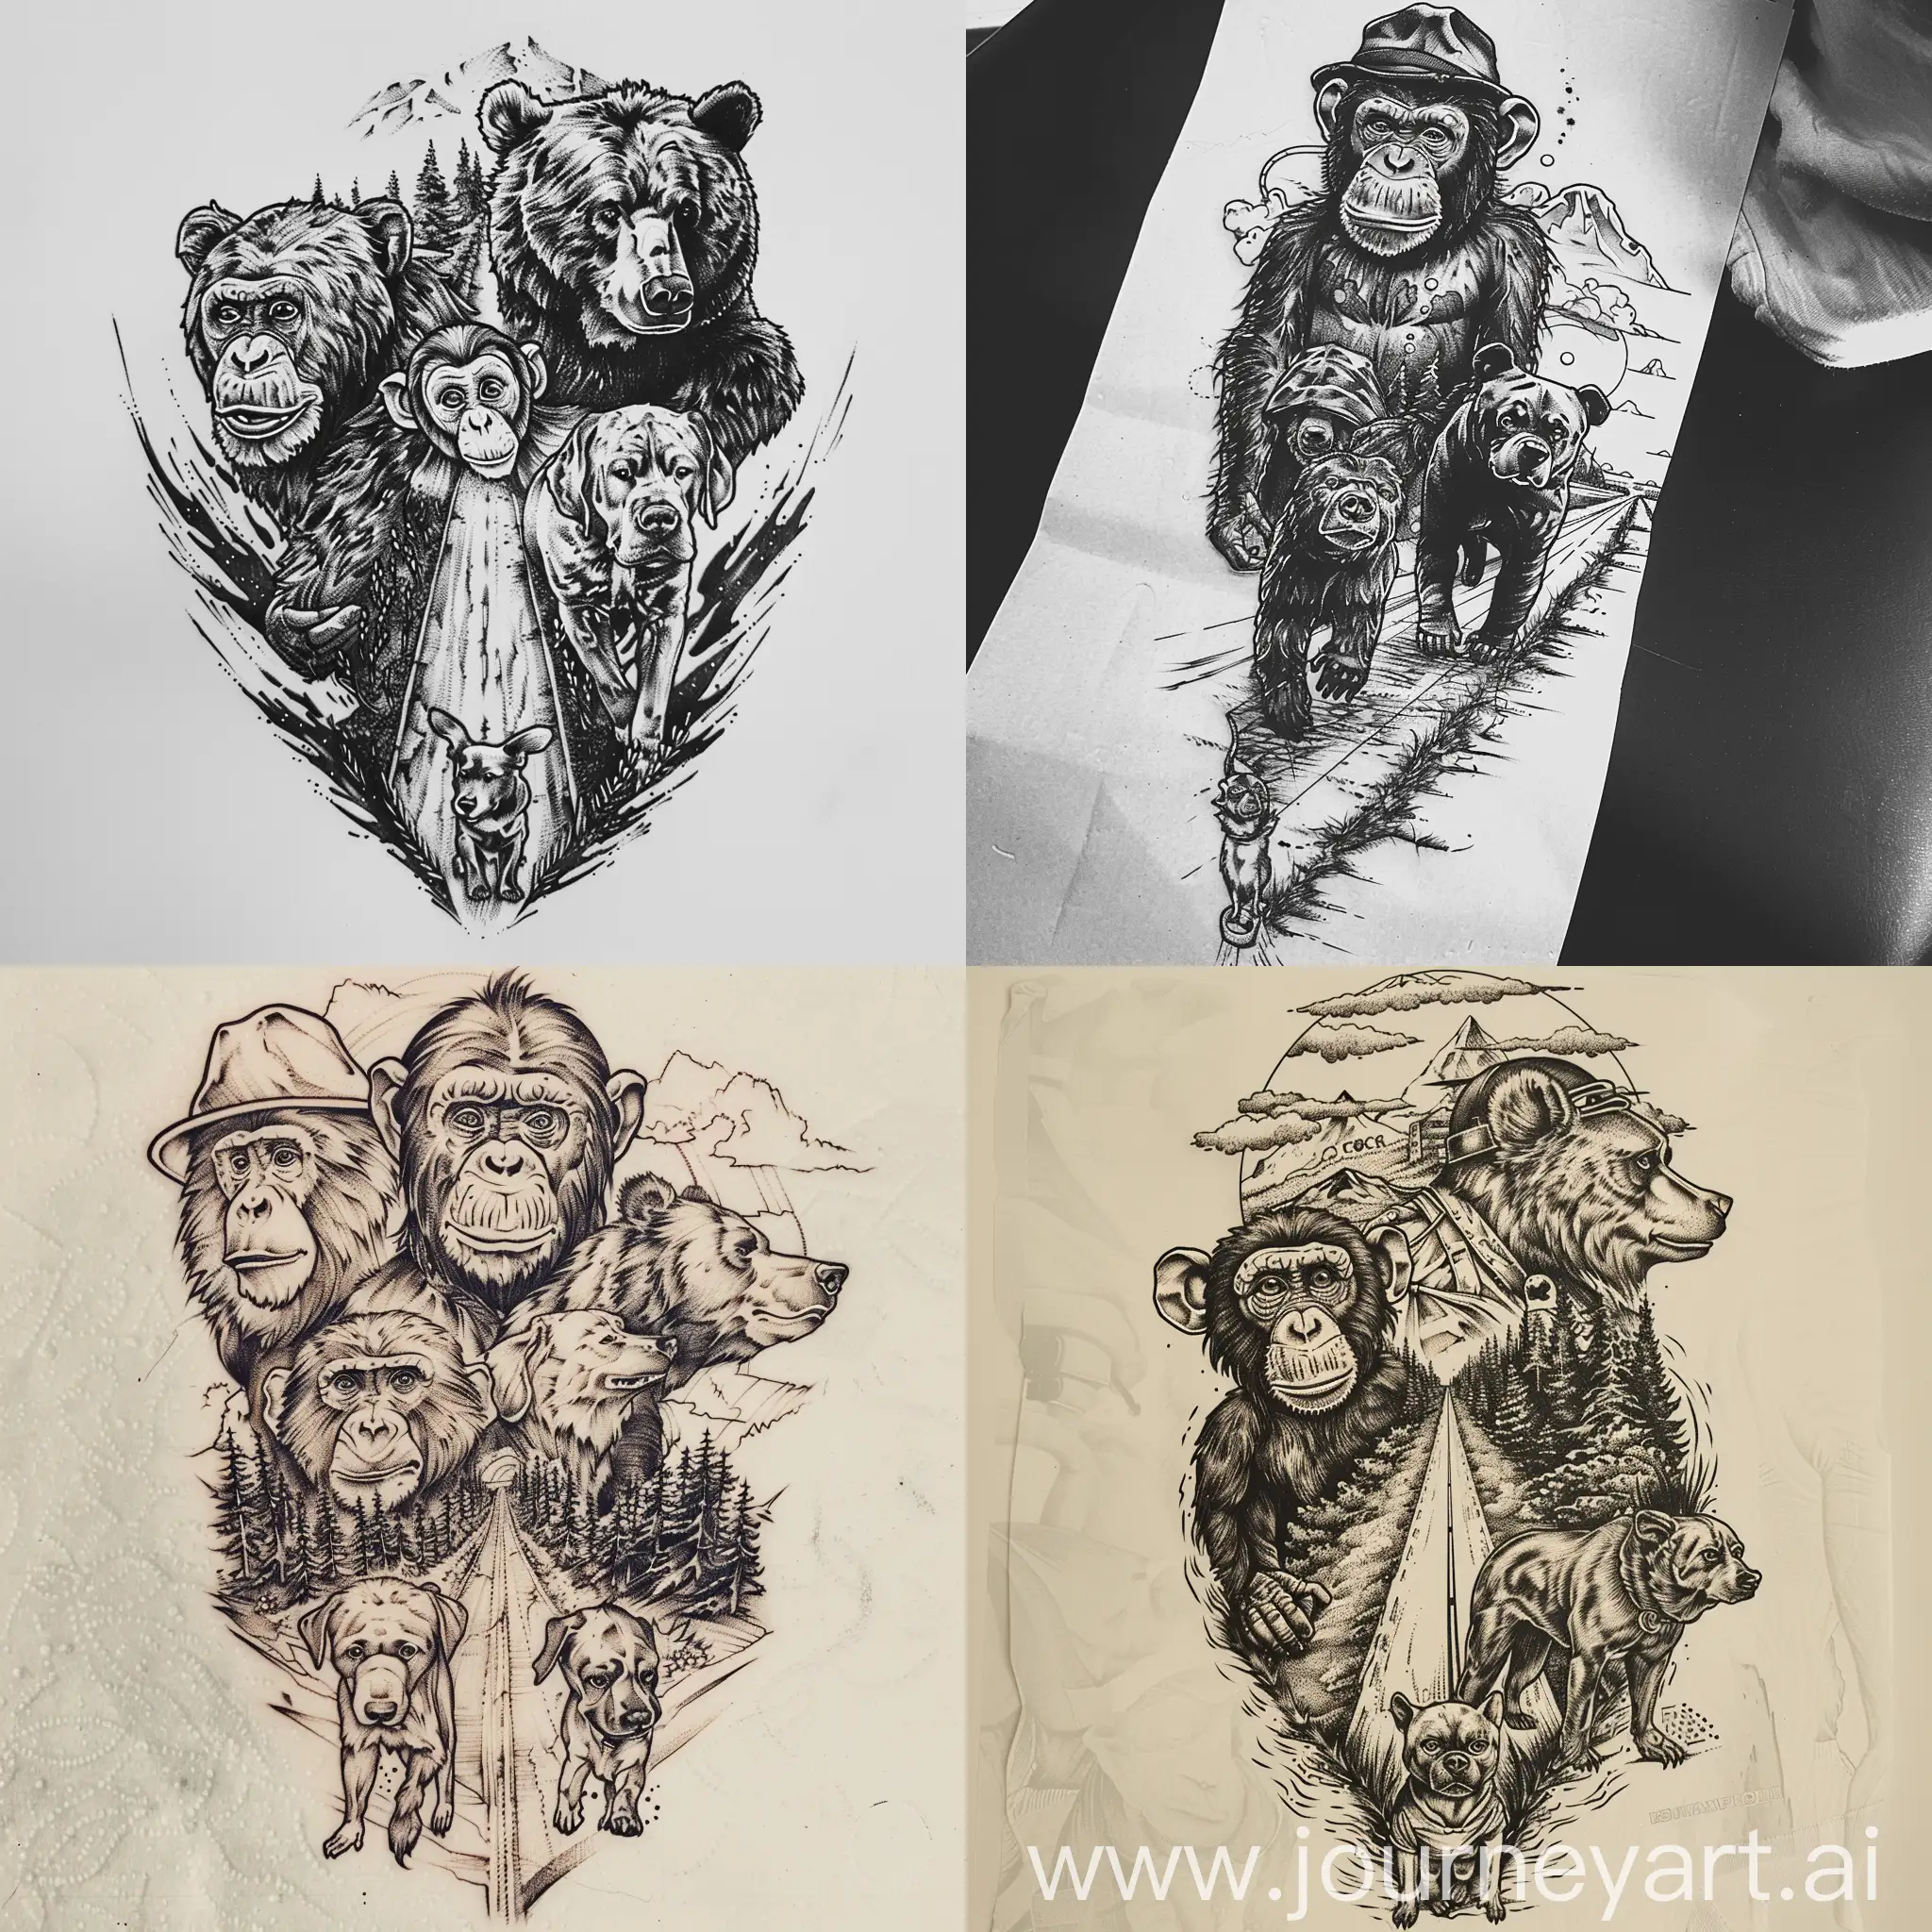 A tattoo design of a monkey, a bear, and a dog all walking together down a long road through the country.